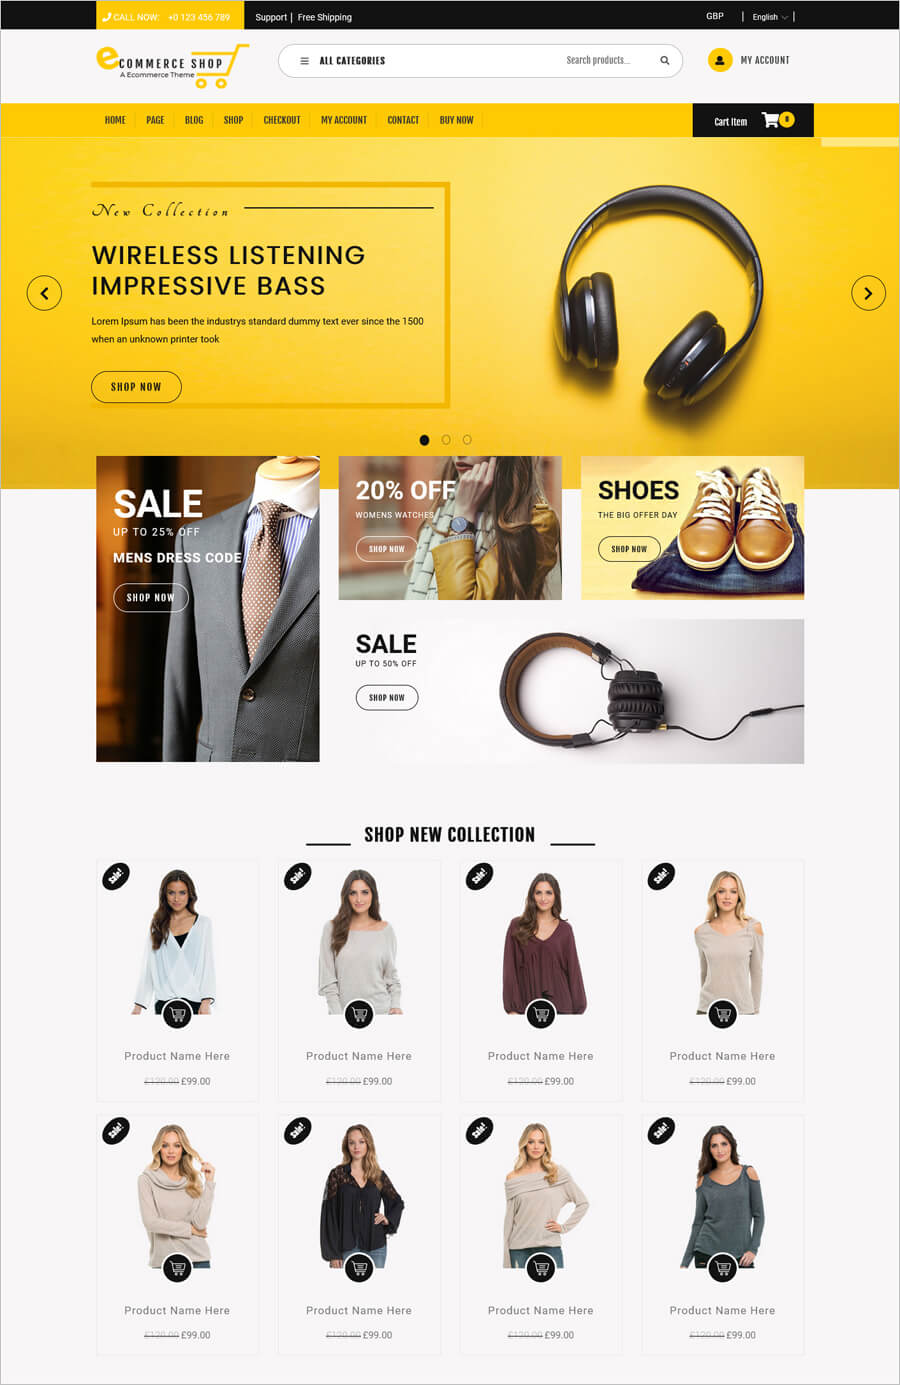 32 Best Free eCommerce Website Templates and WordPress Themes for ...